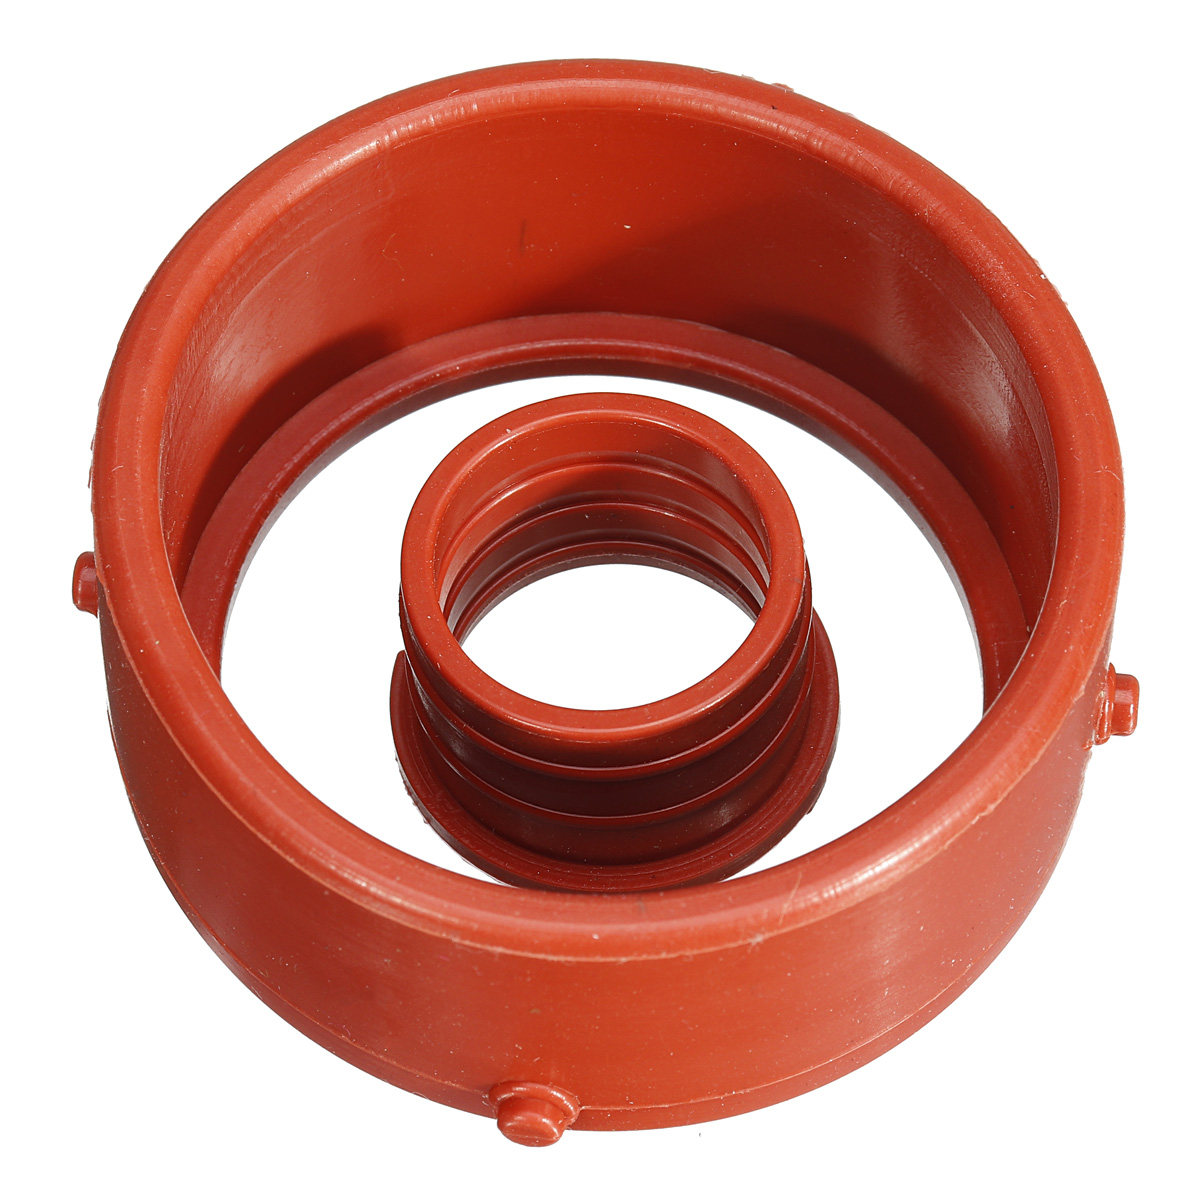 2pcs-Red-Turbo--Breather-Intake-Seal-Kit-For-Mercedes-Benz-OM642-A6420940080-A6420940580-1747599-8